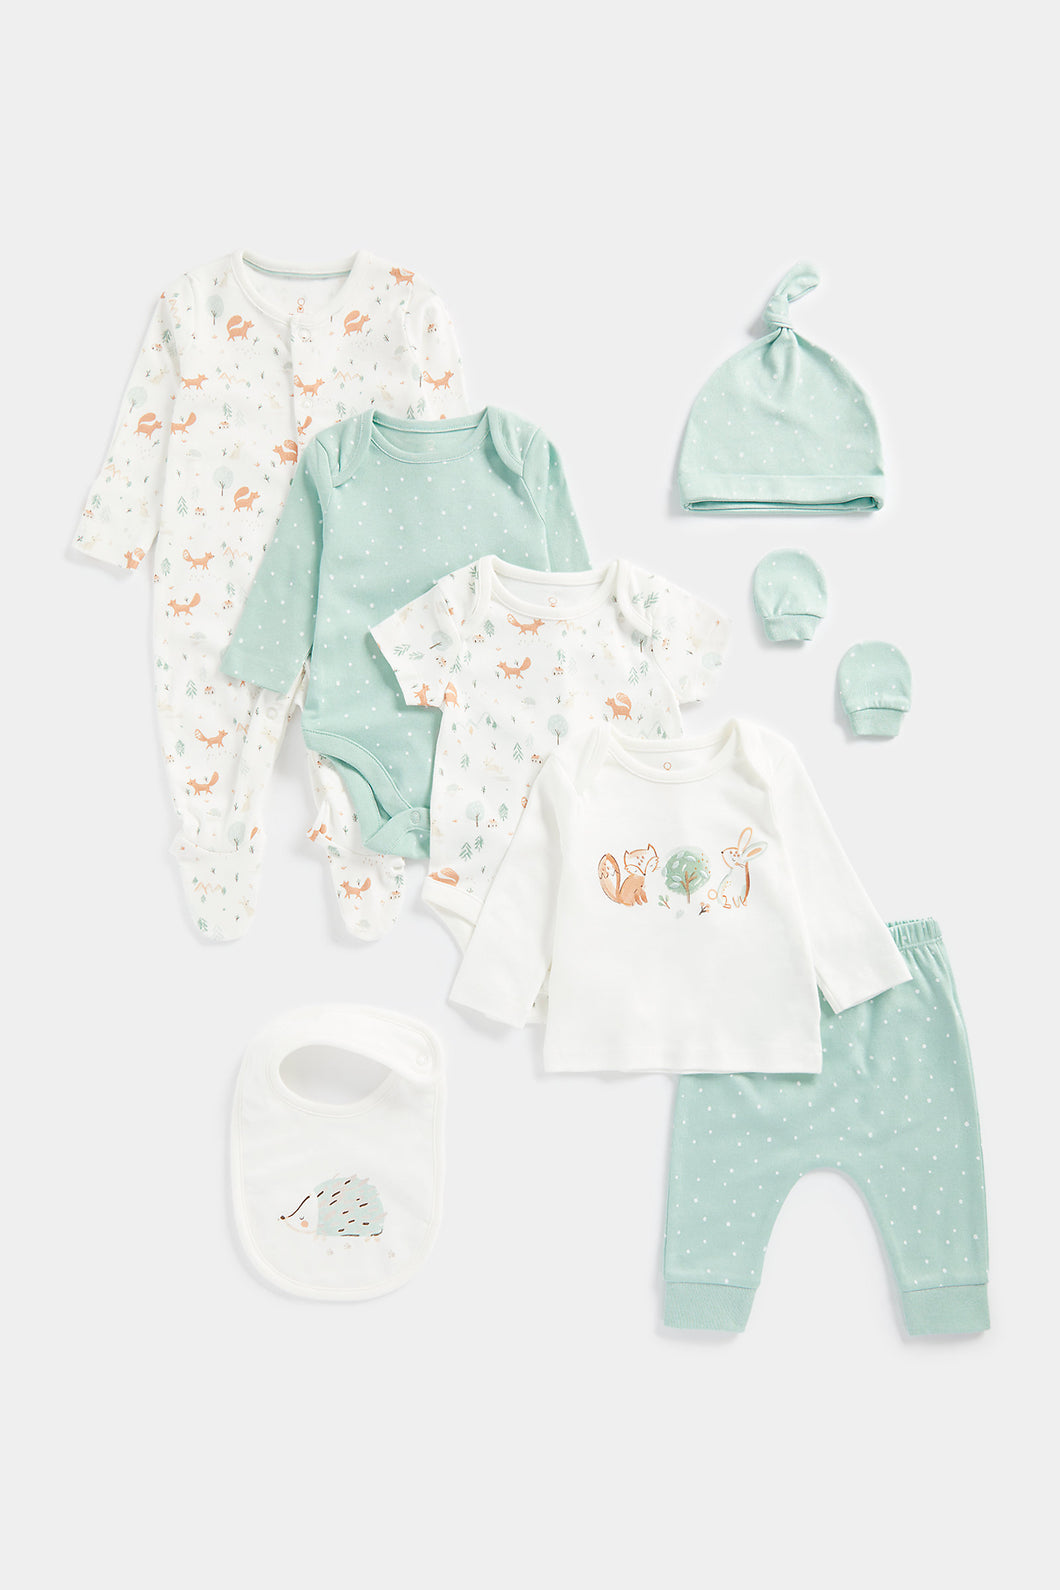 Mothercare My First Woodland 8-Piece Set